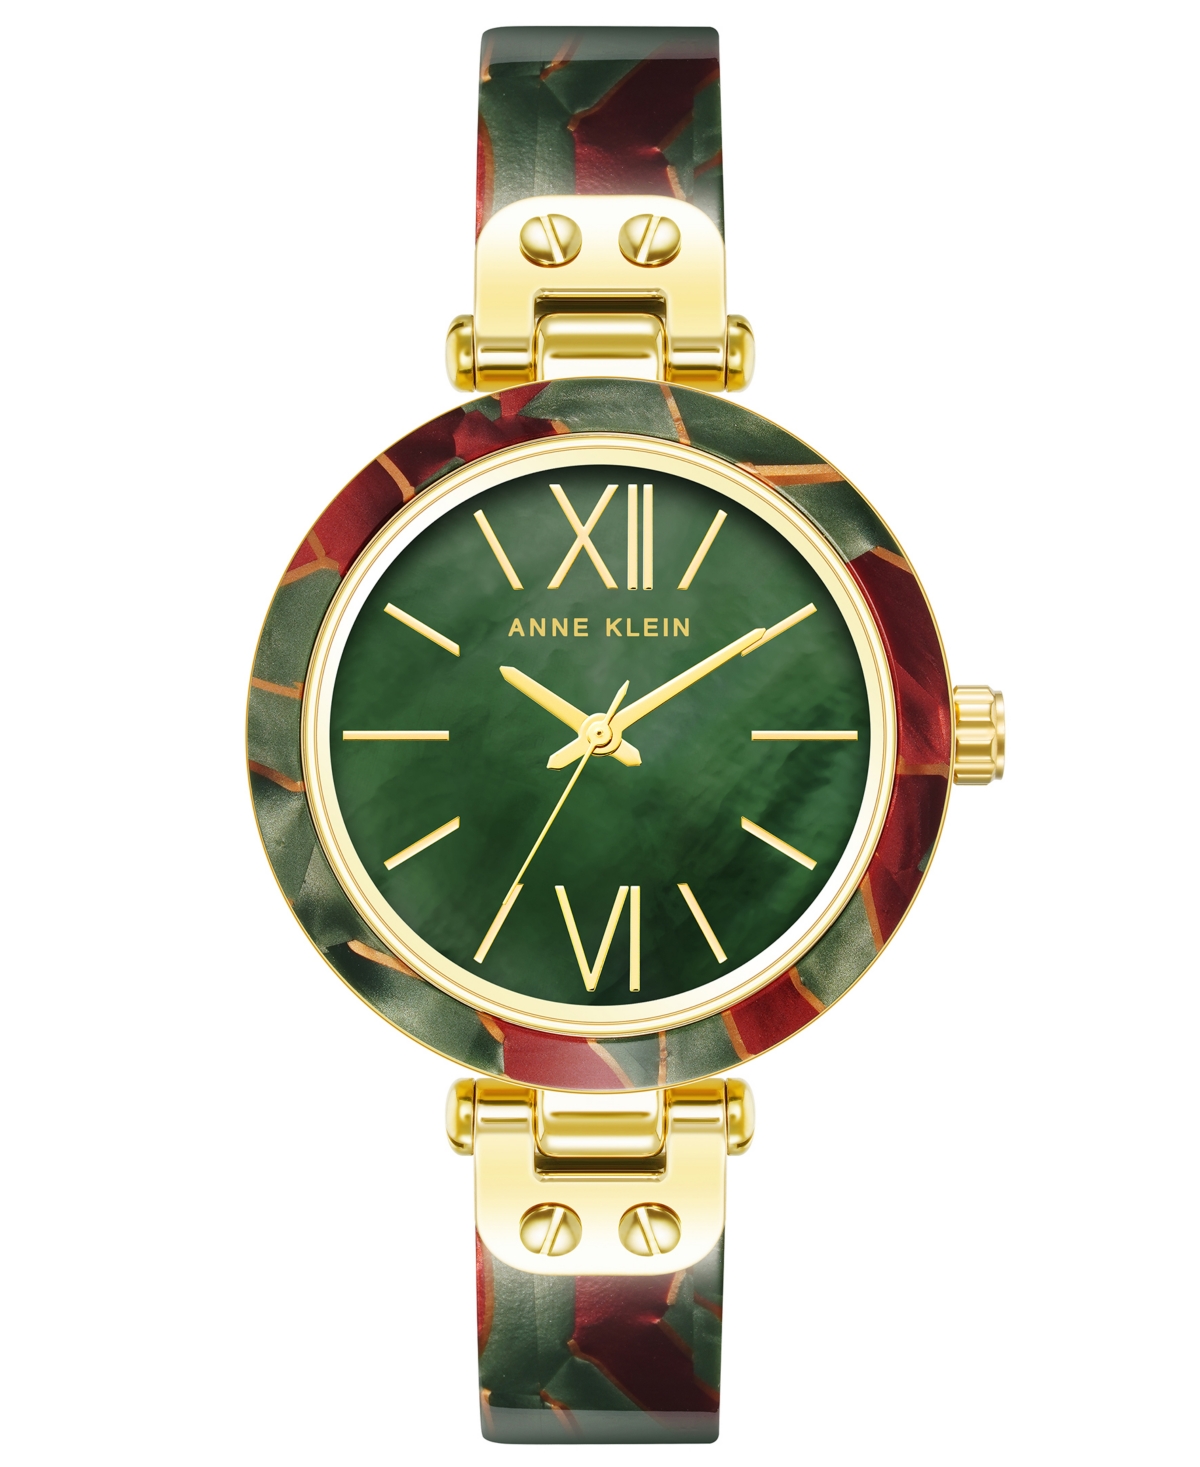 Anne Klein Women's Three-hand Quartz Green And Burgundy Resin With Gold-tone Alloy Accents Bangle Watch, 34mm In Gold-tone,green,burgundy